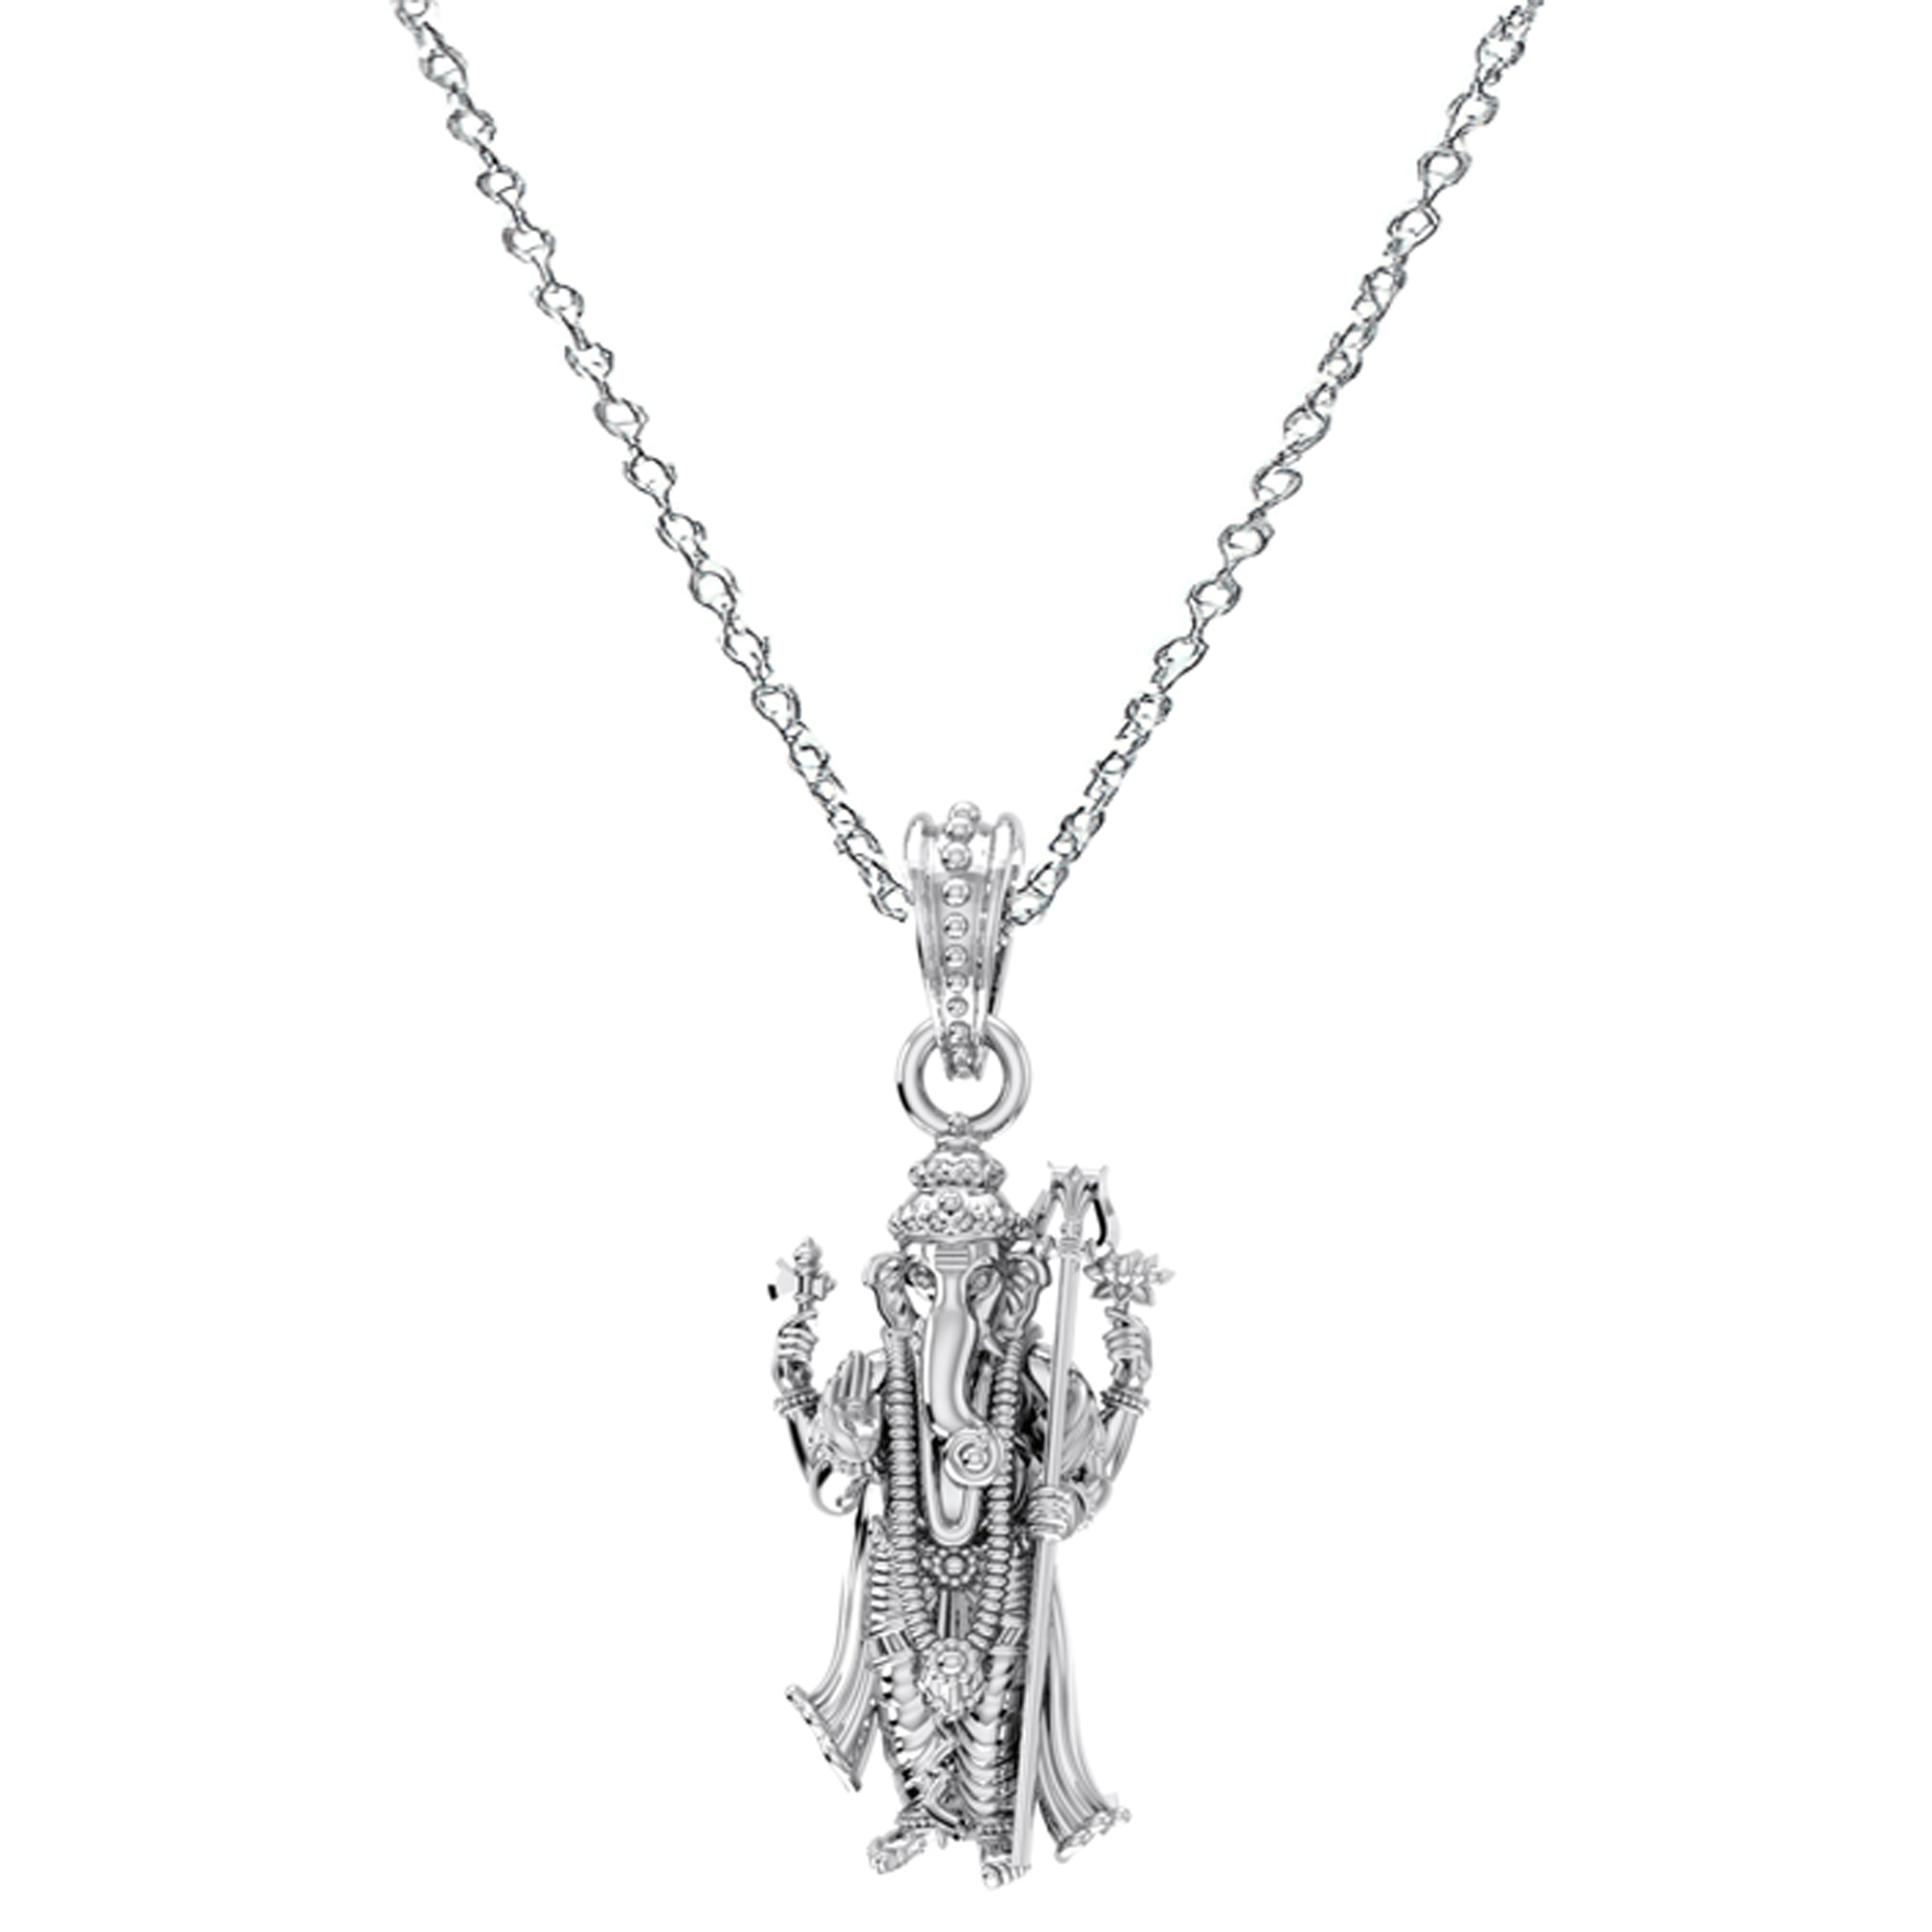 Akshat Sapphire Sterling Silver (92.5% purity) God Ganesha Chain Pendant (Pendant with Anchor Chain-22 inches) for Men & Women Pure Silver Lord Ganapathy Chain Locket for Good Health & Wealth